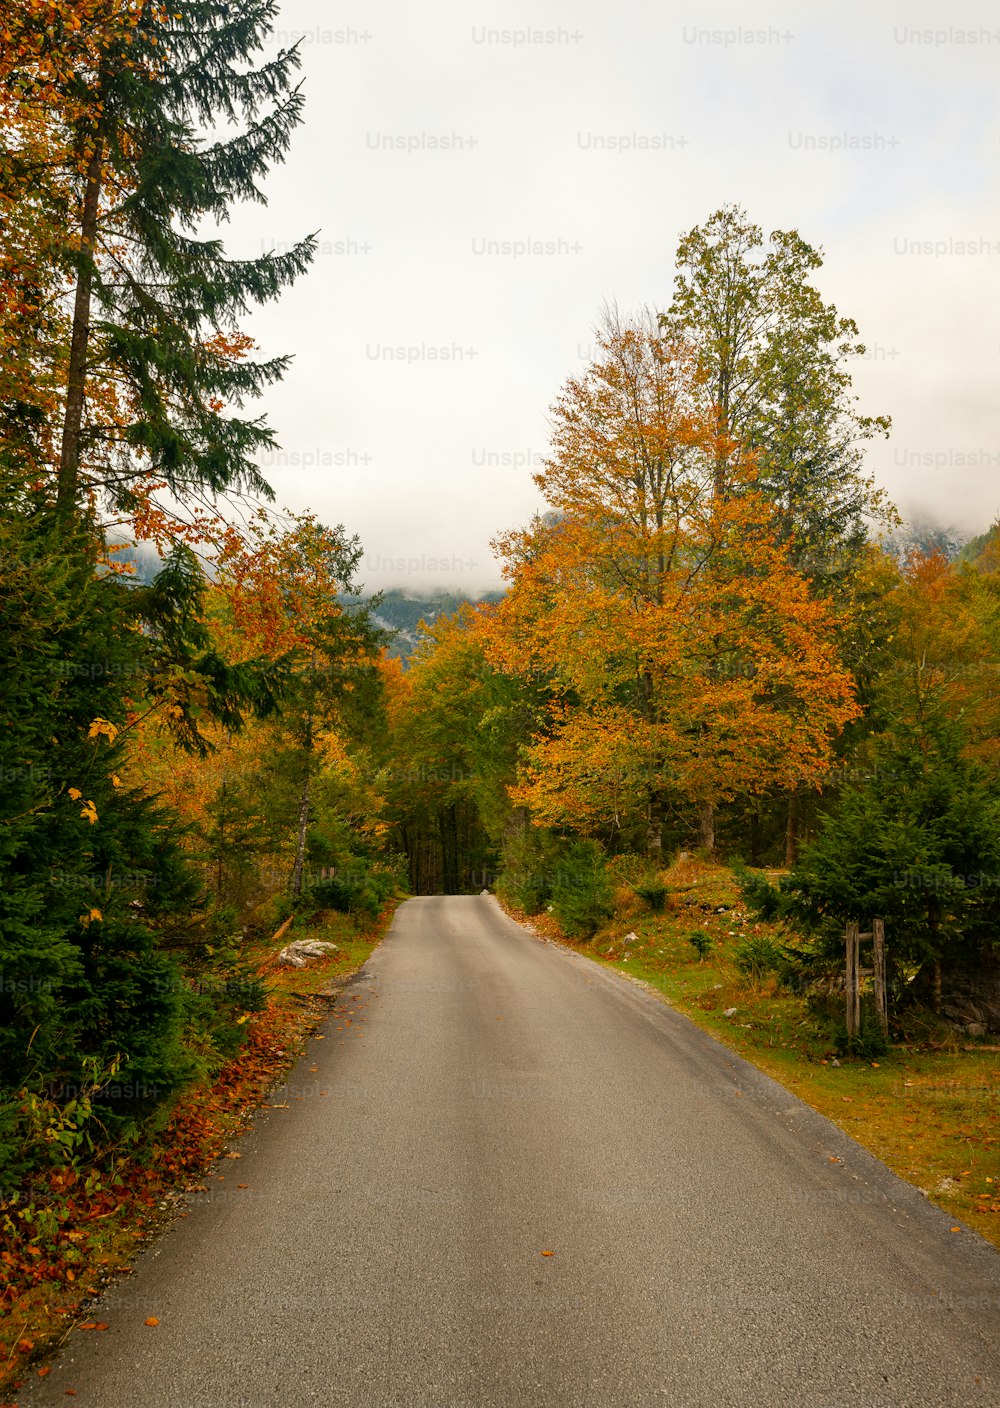 an empty road surrounded by trees and foliage